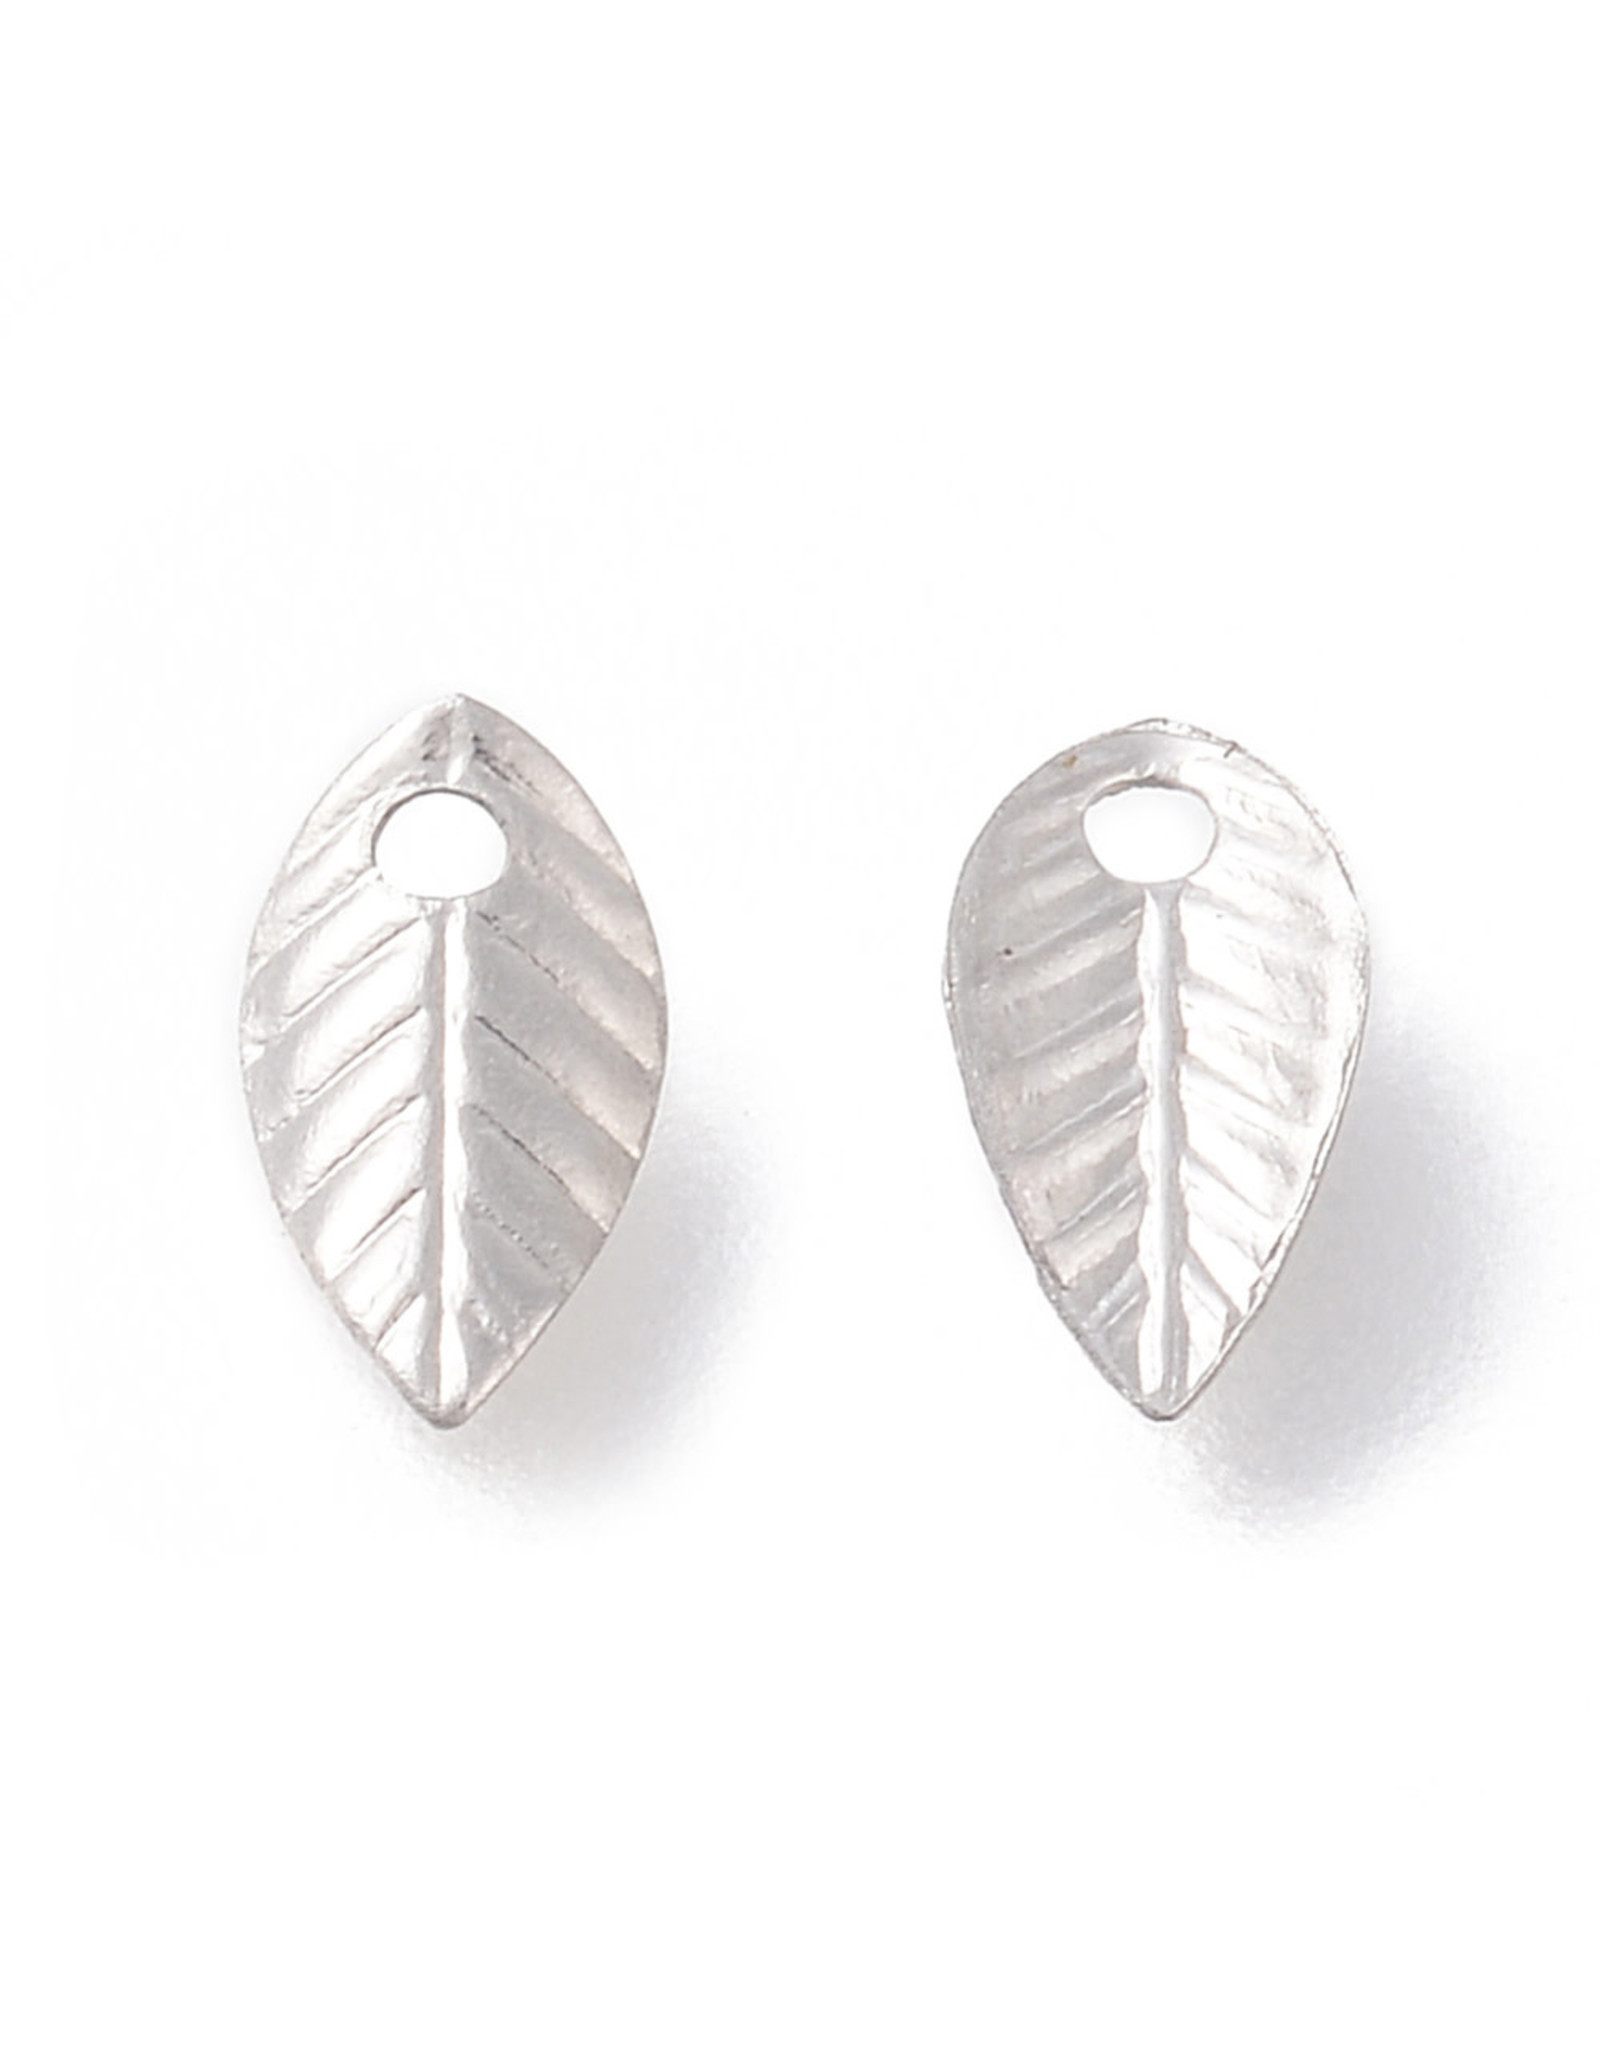 Leaf Stainless Steel  7x4mm  x100  NF